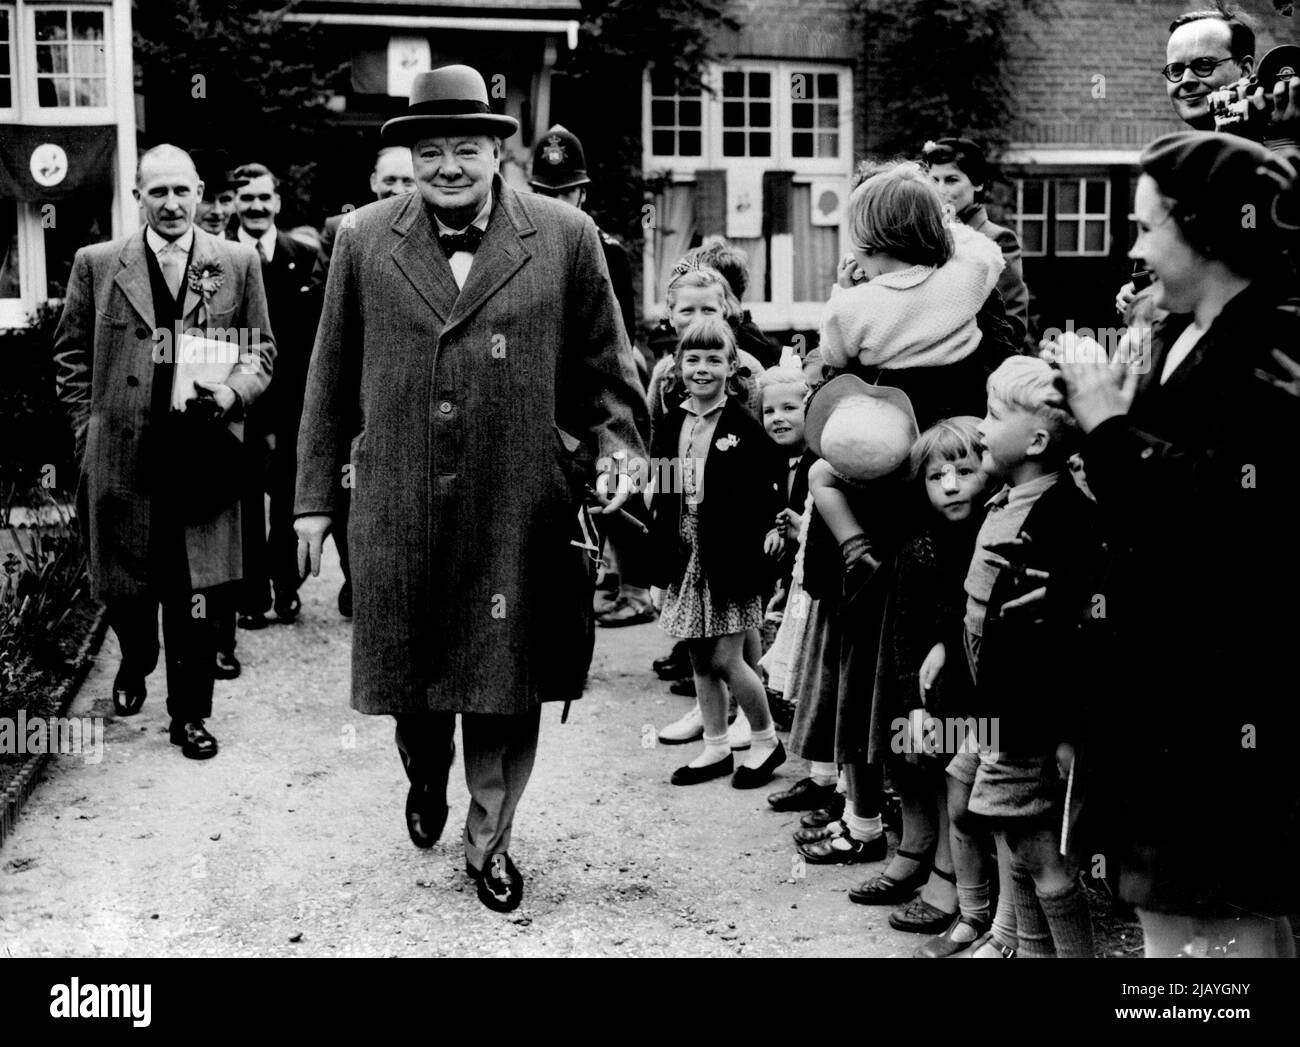 Churchill With Their Approval -- A beaming Sir Winston Churchill, looking in the best of health, gets applause and approving smiles as he leaves the Conservative Committee rooms at ' The Drive ' Wanstead, Essex, in an eve-of-the-poll Tour of his constituency to-day (Wednesday). May 25, 1955. (Photo by Reuterphoto). Stock Photo